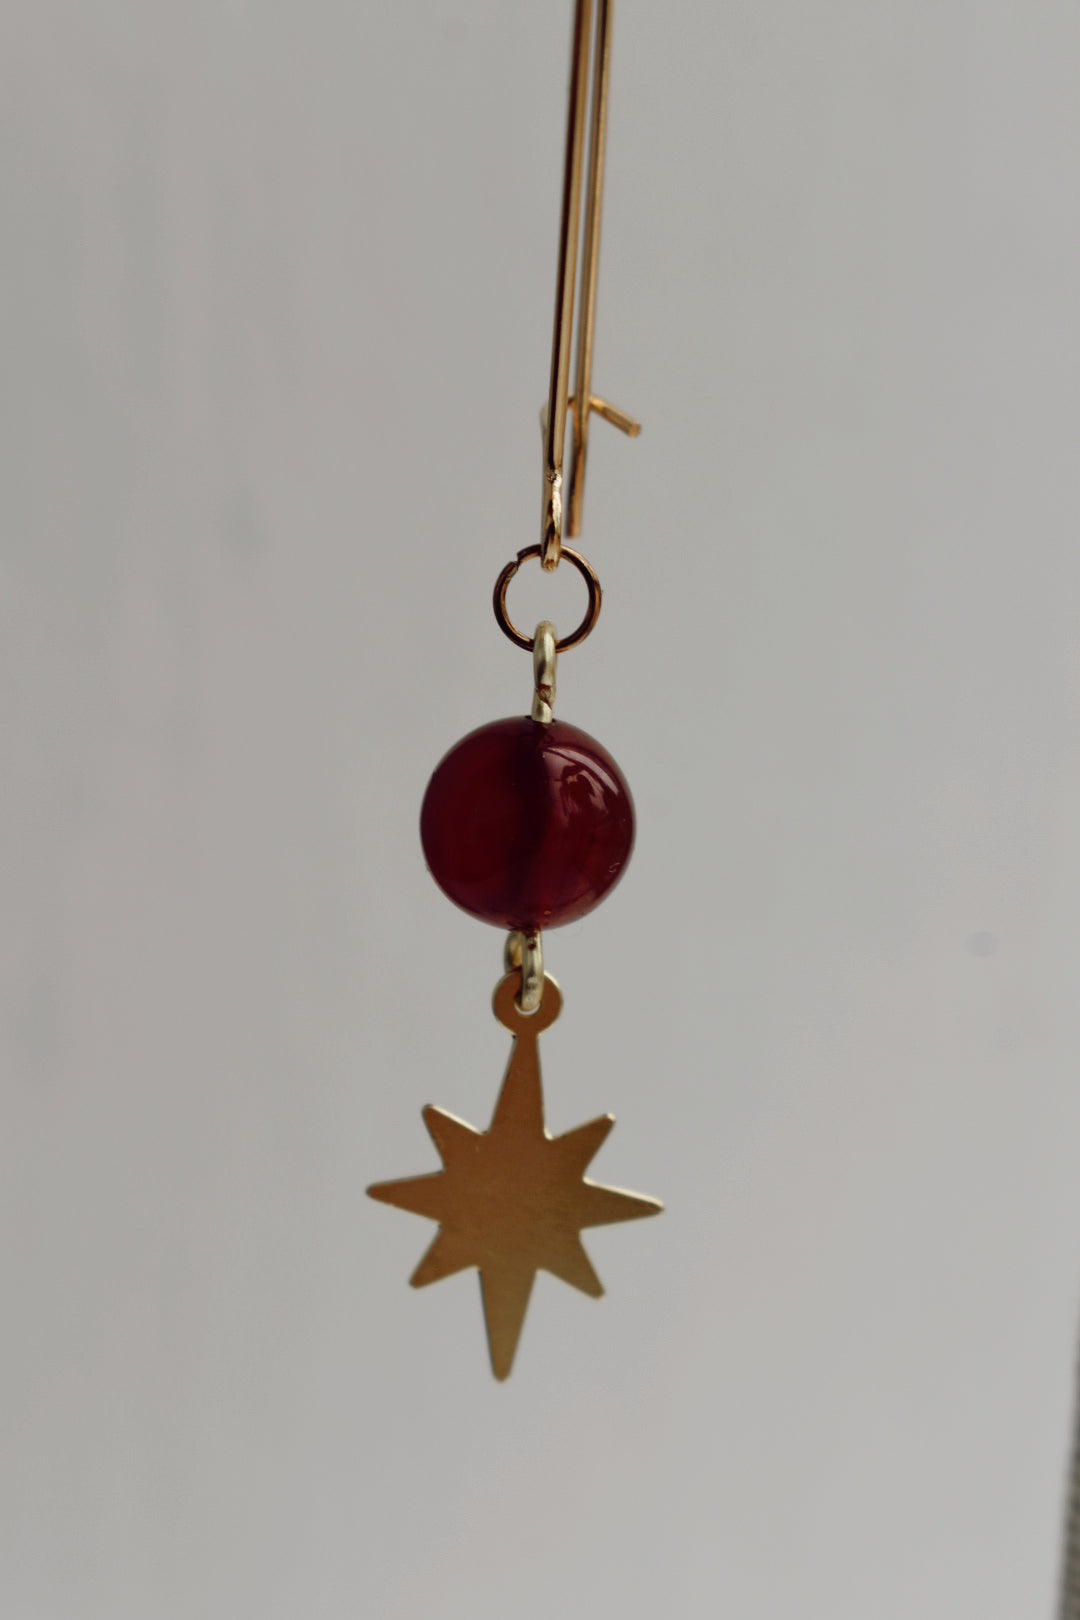 semi-precious stone red aventurine laser cut brass star pendant and elongated gold plated ear wires gold earrings